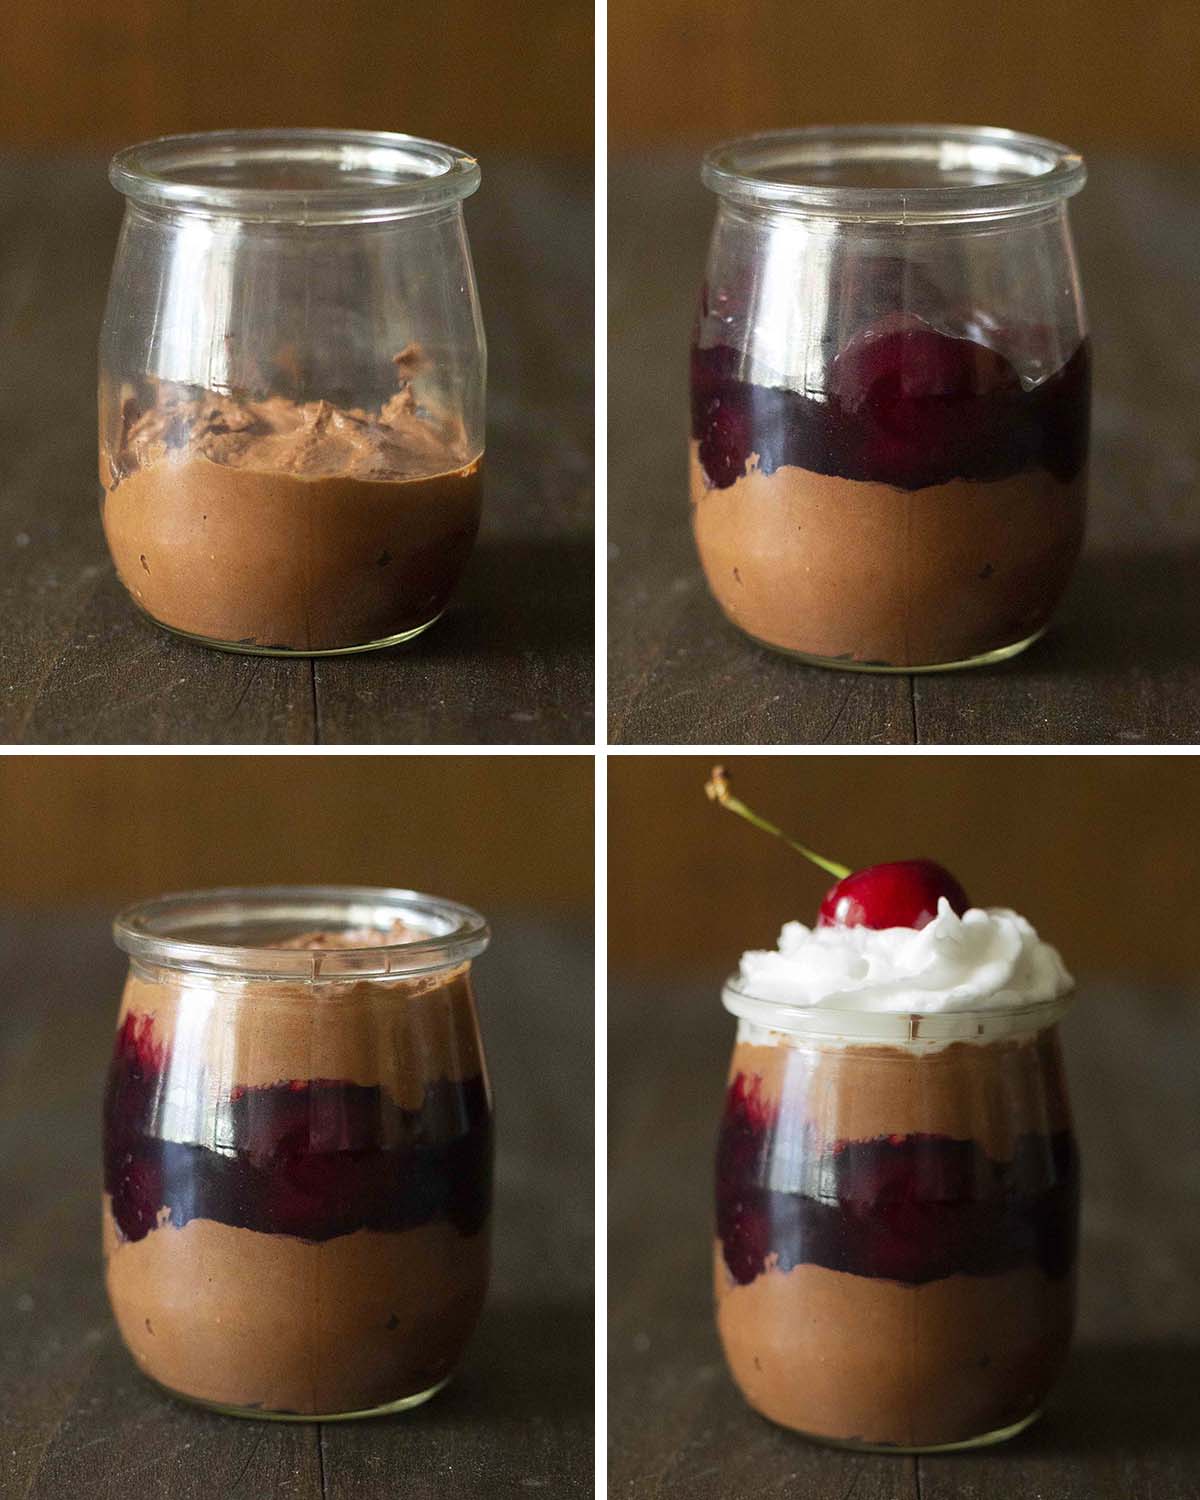 A collage of four images showing the second sequence of steps needed to make black forest chocolate mousse.